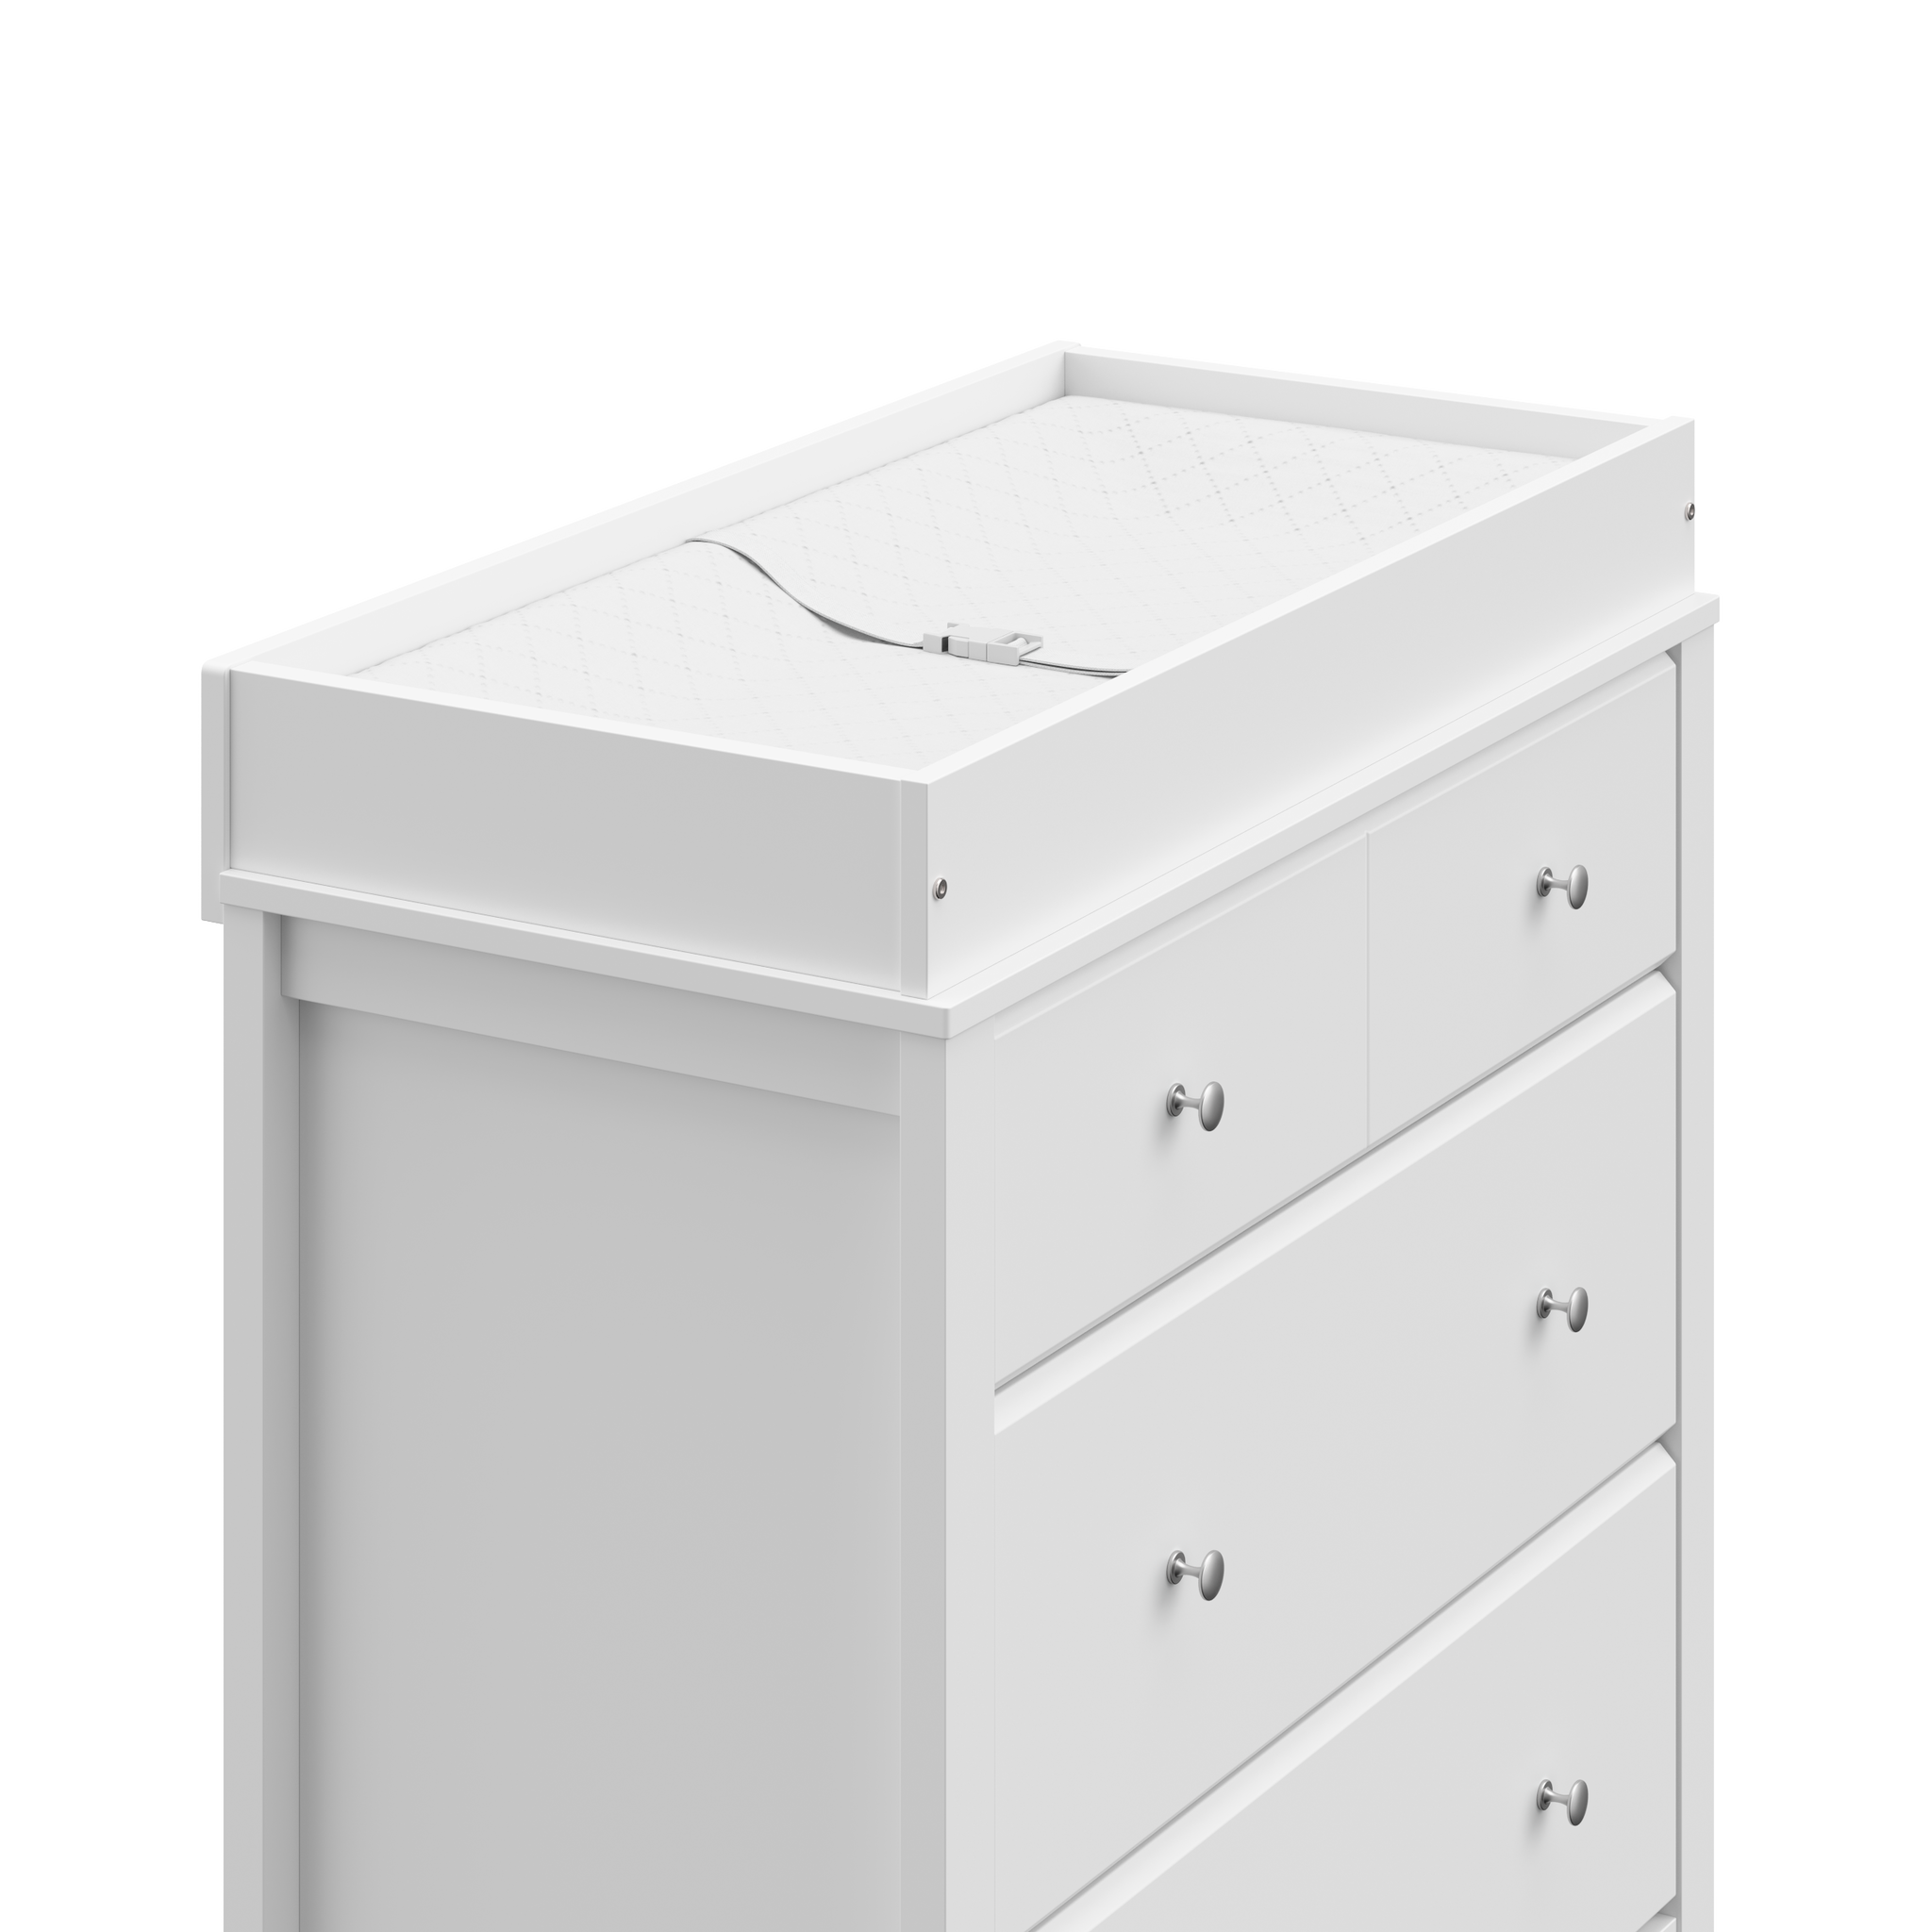 close-up view of white chest